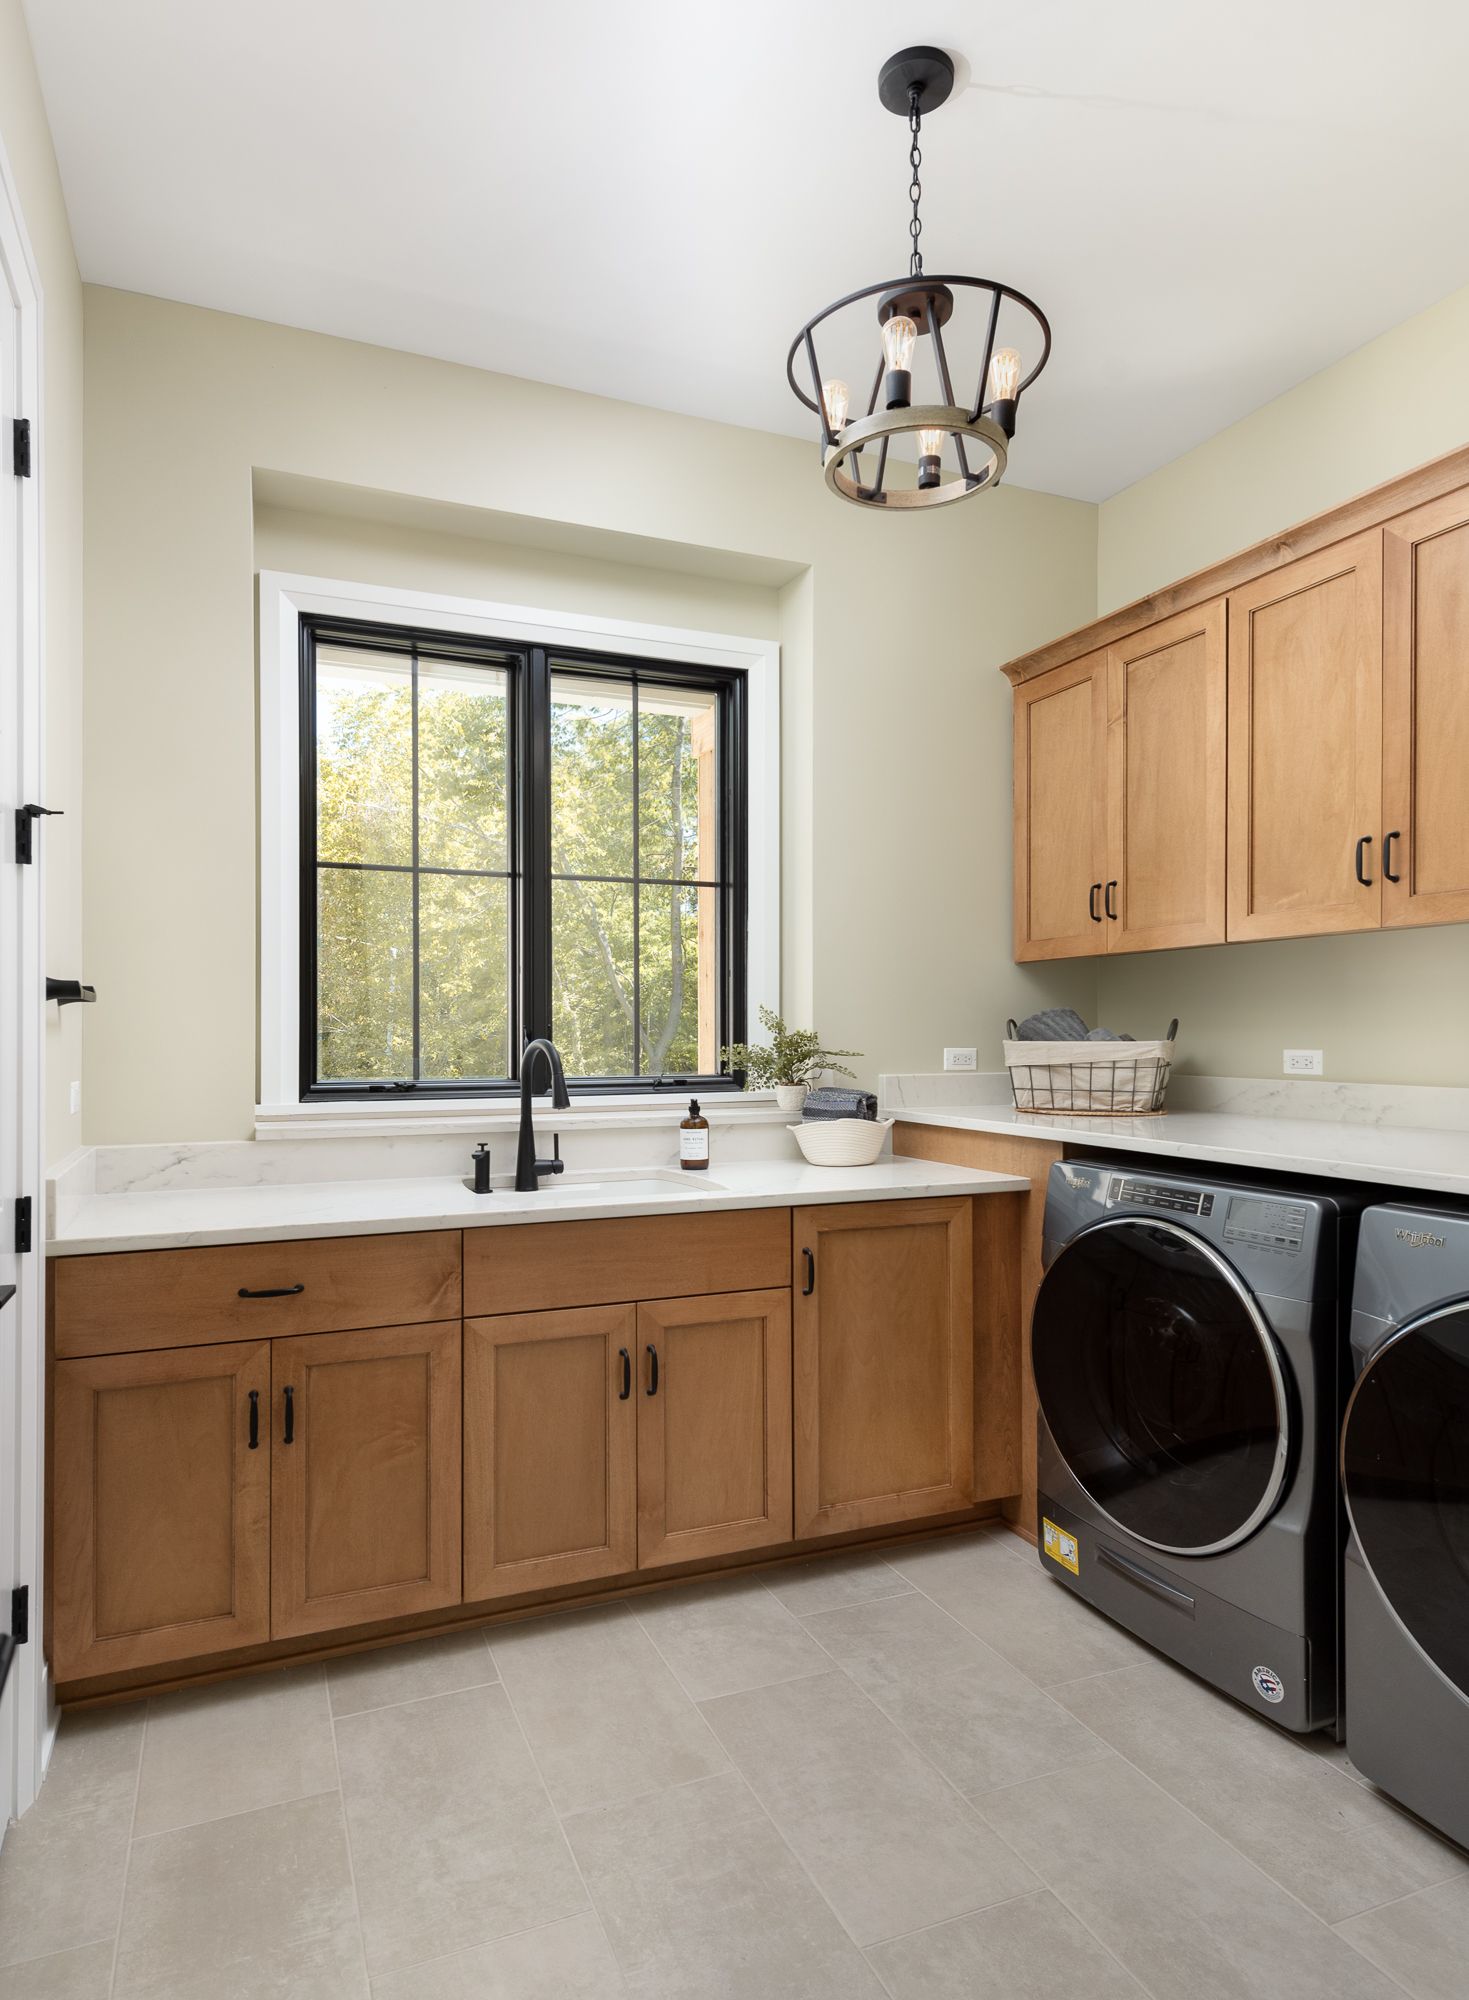 Laundry room with wood cabinets and modern farmhouse lighting